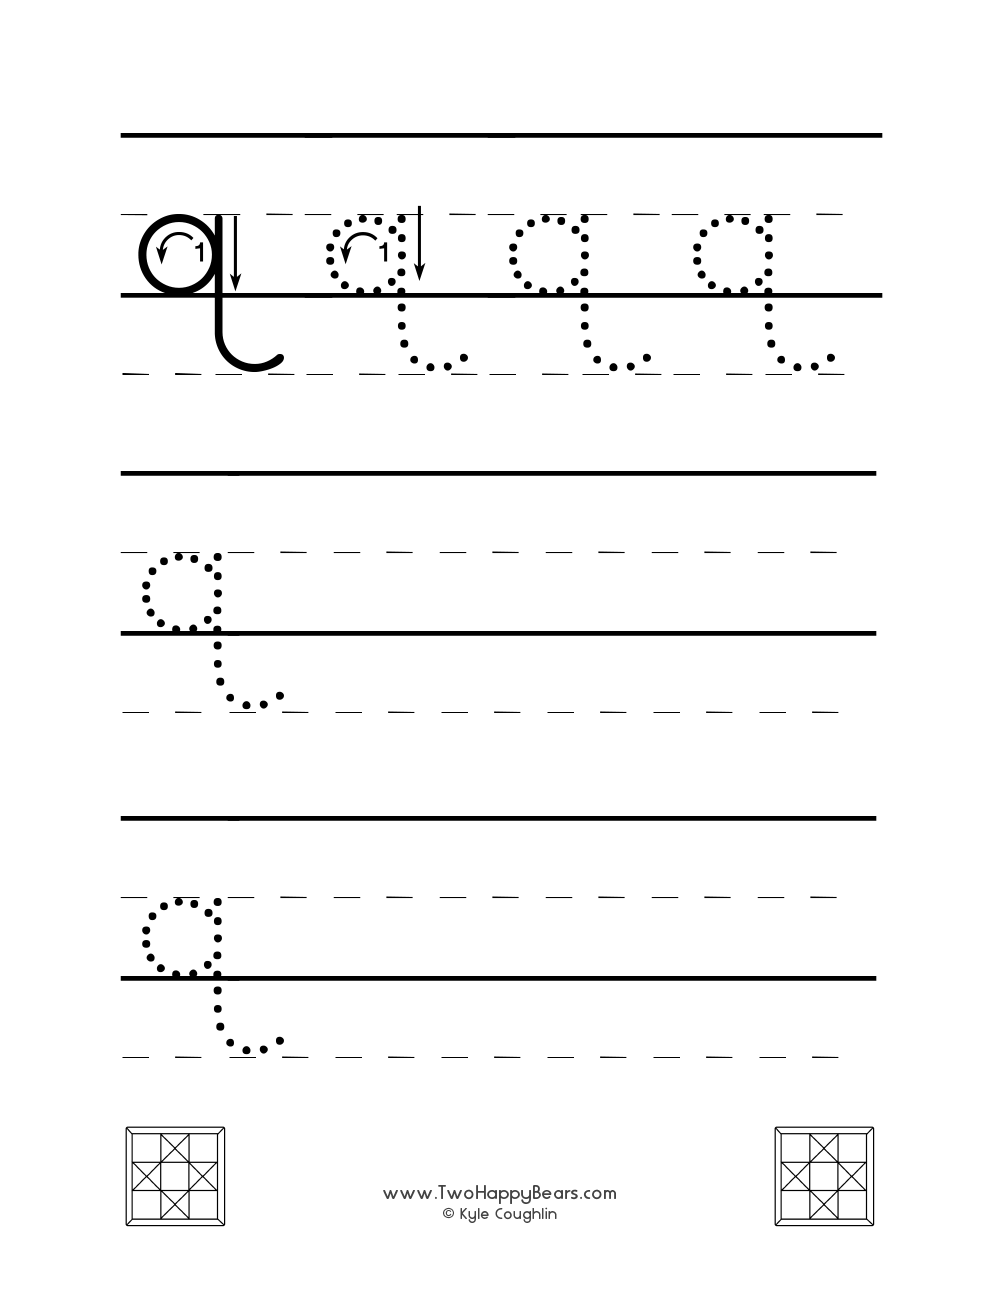 Lowercase letters to trace and write on your own, for every letter of the alphabet.